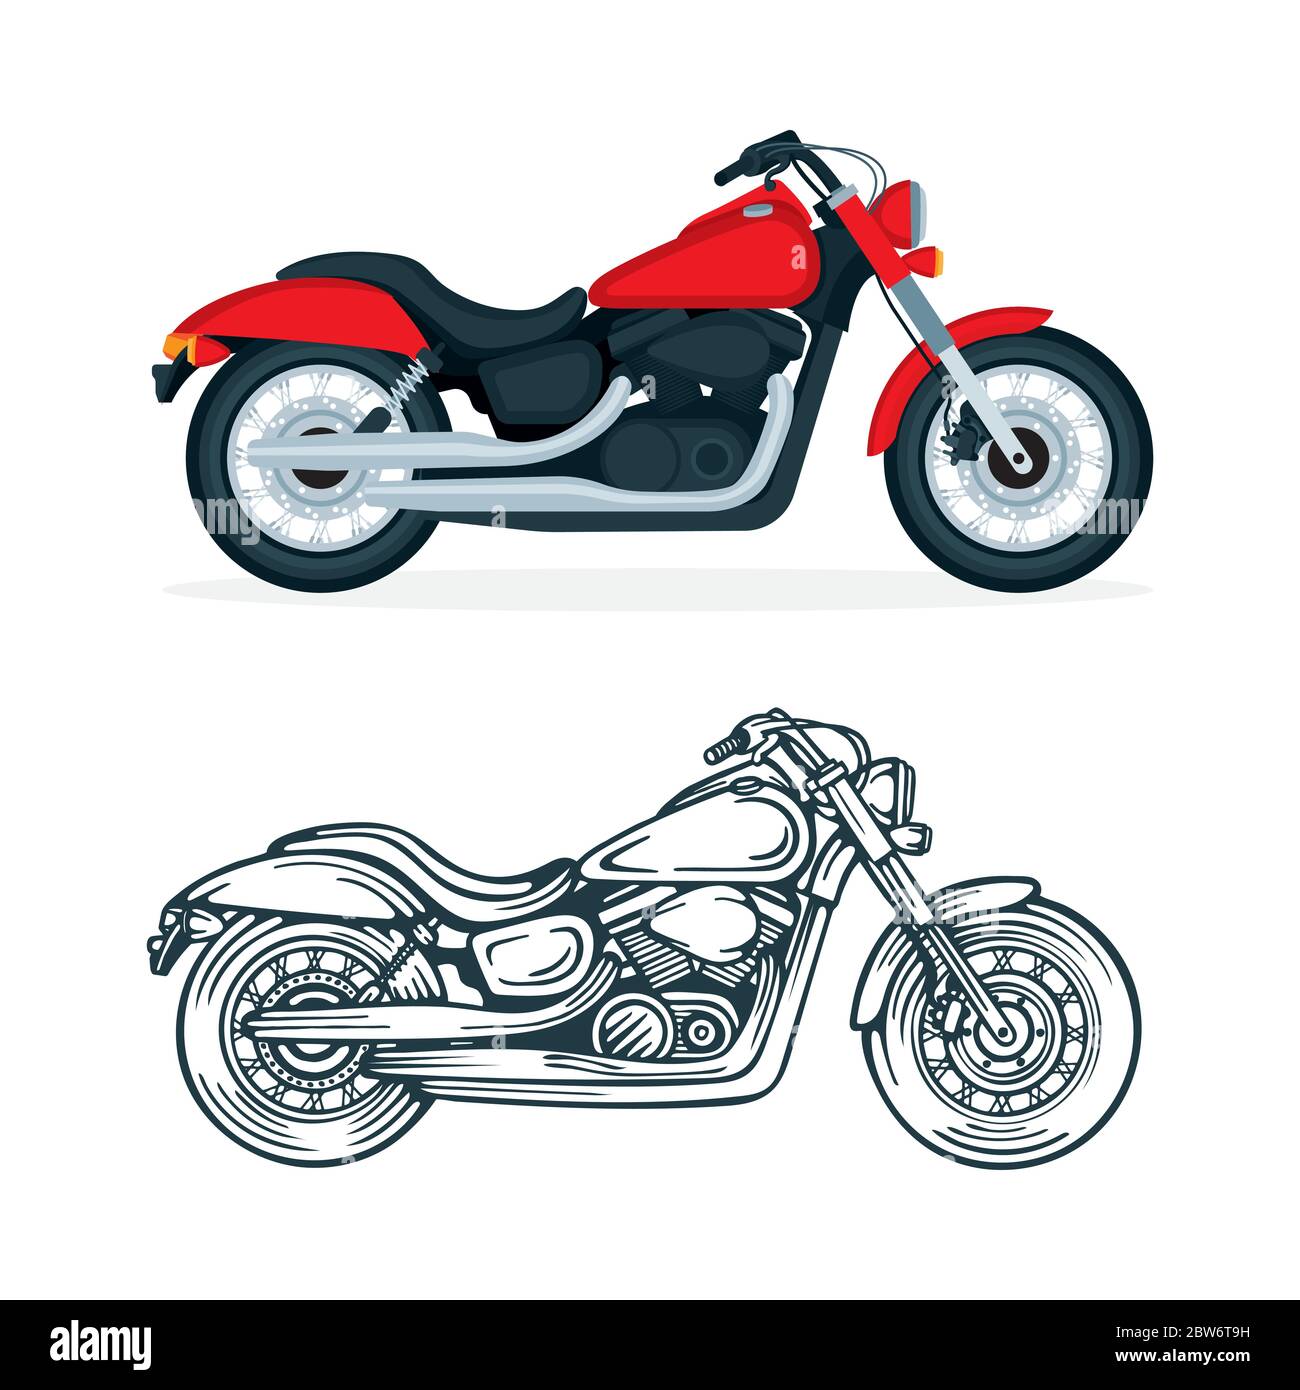 Motorcycle vector realistic and hand drawn illustrations set. Motorbike on a white background. Vintage chopper motorcycle. Stock Vector